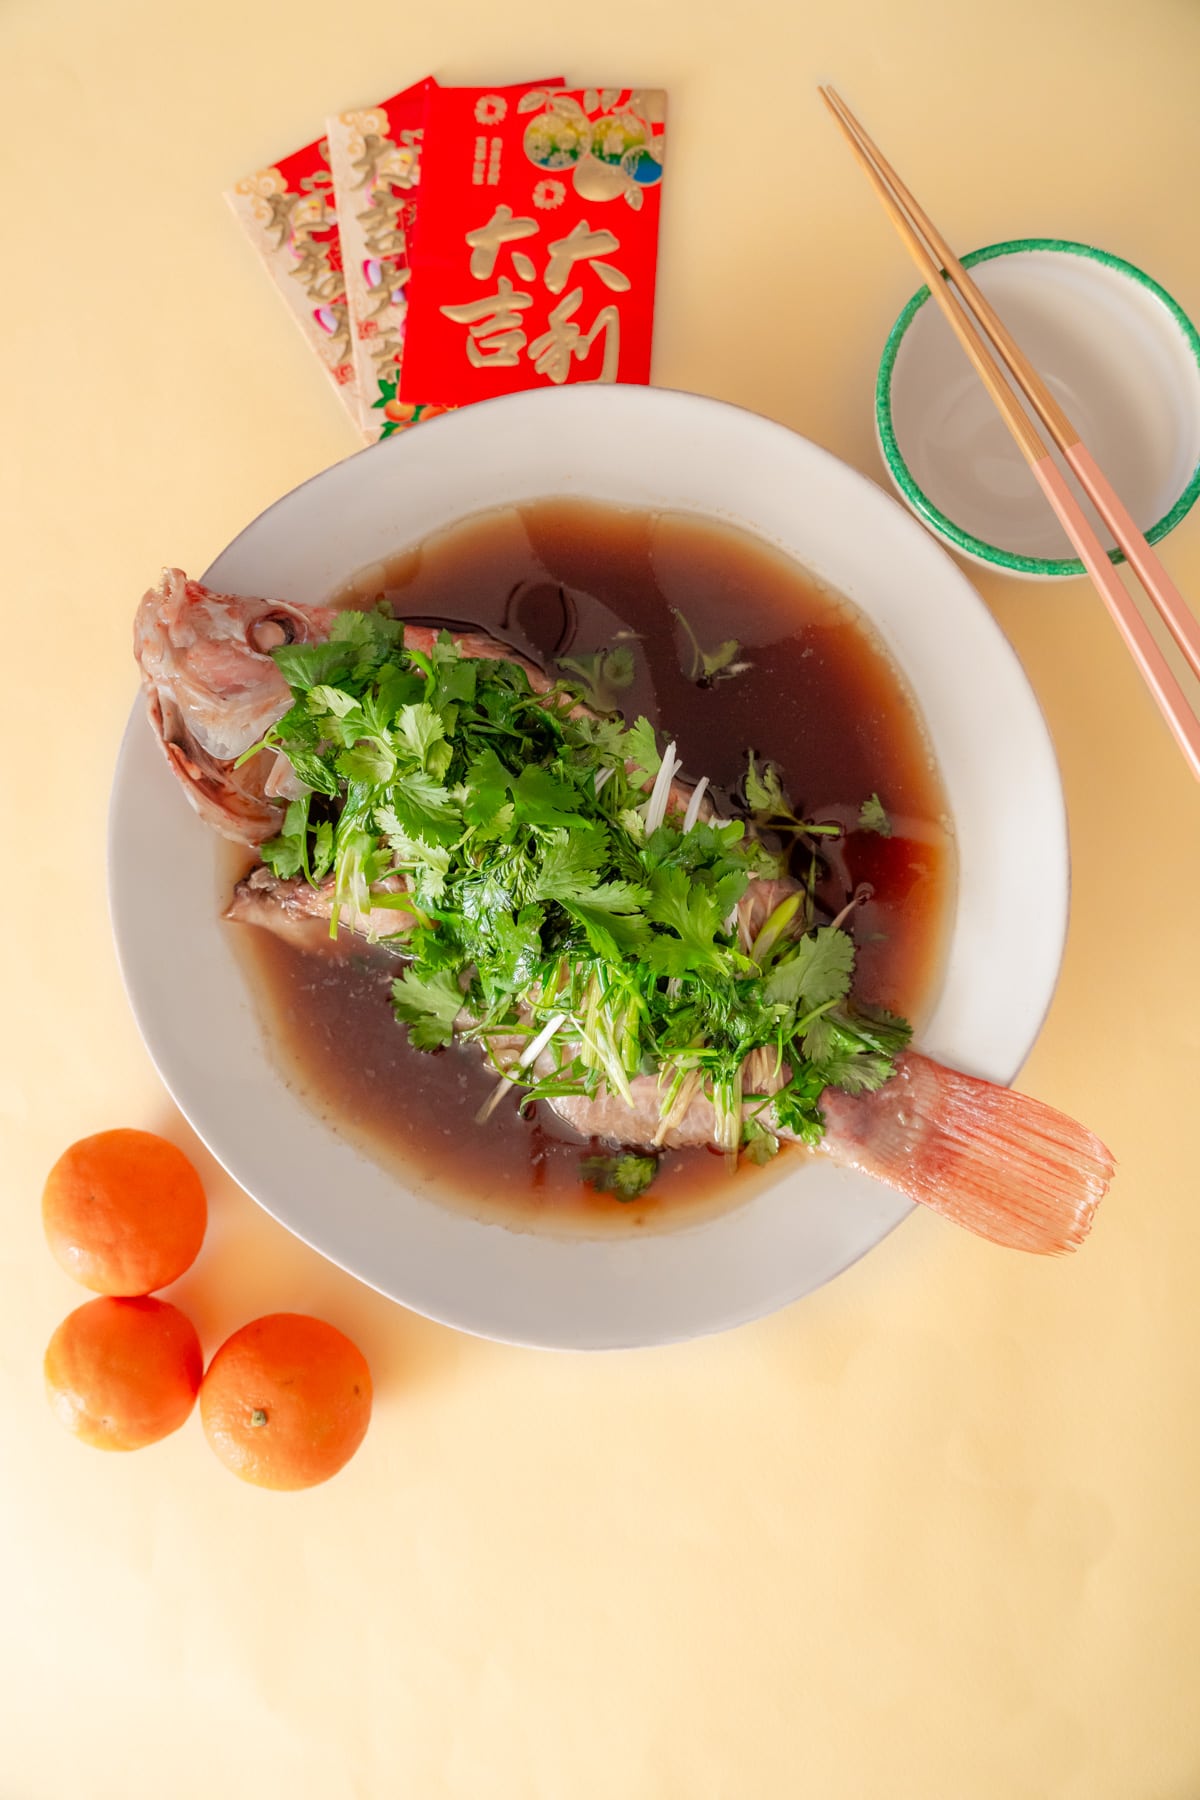 Top-down view of a steamed Chinese fish with sauce and topped with fresh cilantro, scallions and ginger on a white plate next to a small rice bowl with chopsticks, a few oranges, and Lunar New Year red envelopes.